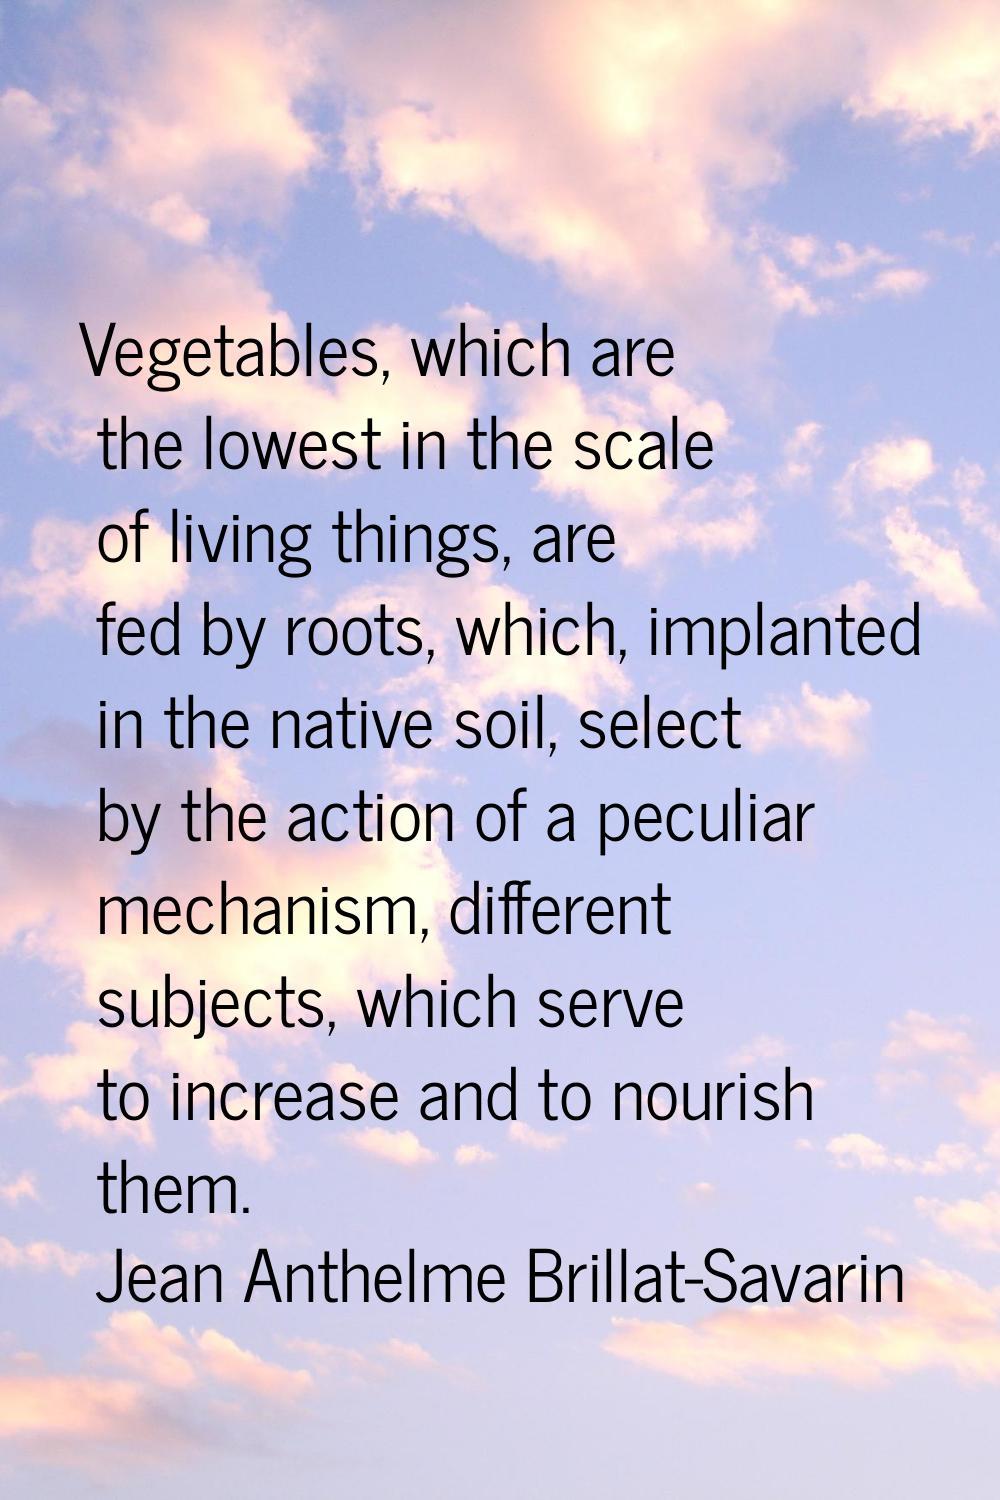 Vegetables, which are the lowest in the scale of living things, are fed by roots, which, implanted 